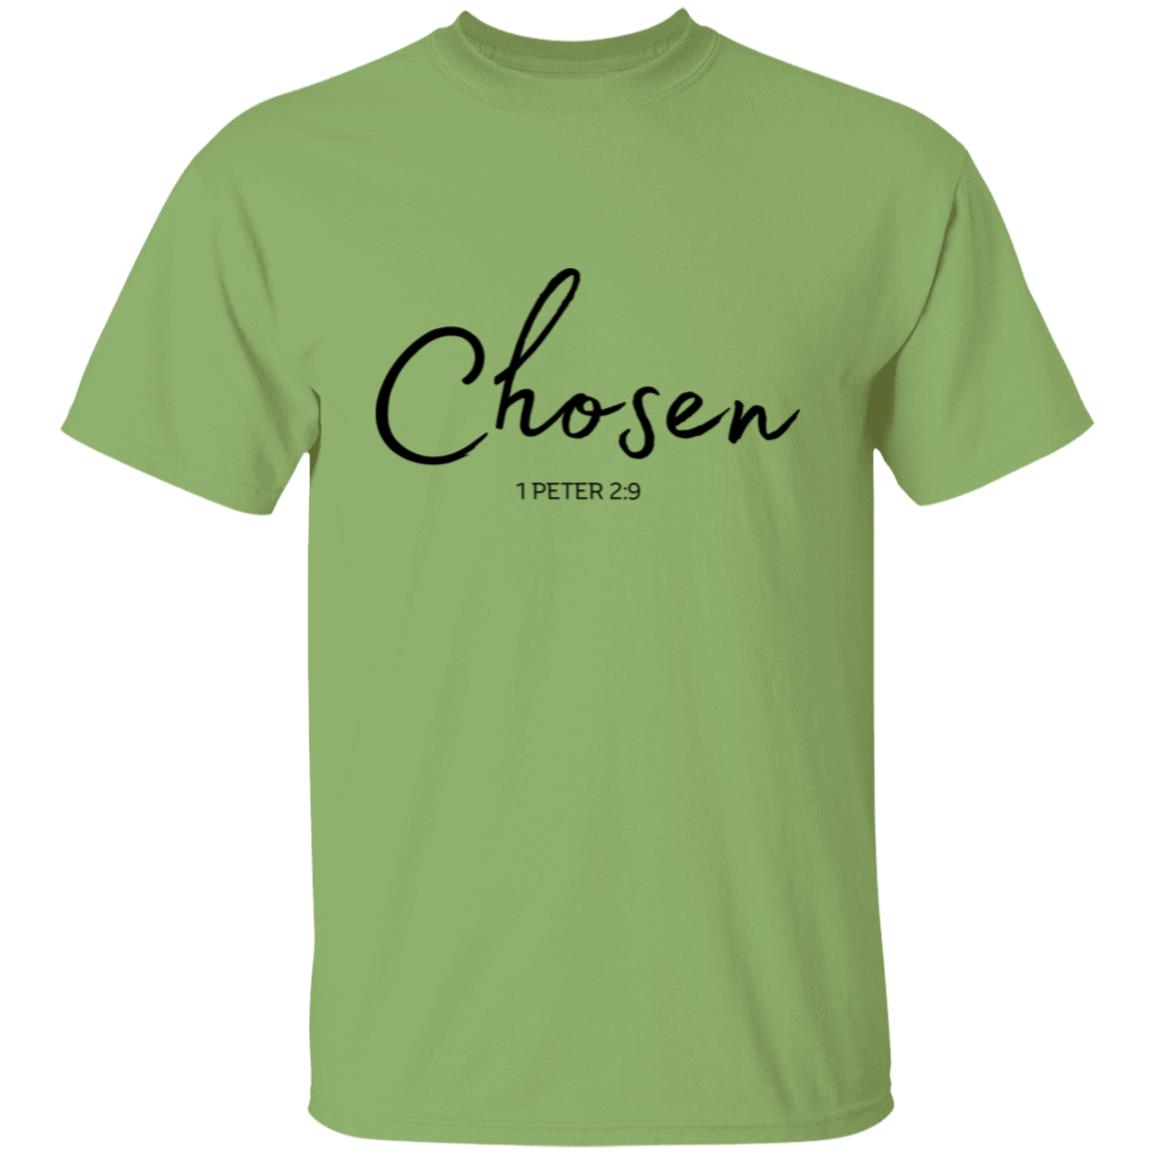 Get trendy with Chosen (2) Chosen (1 Peter 5:9) T-Shirt Words of Faith Series (Black Text) - T-Shirts available at Good Gift Company. Grab yours for $21.95 today!